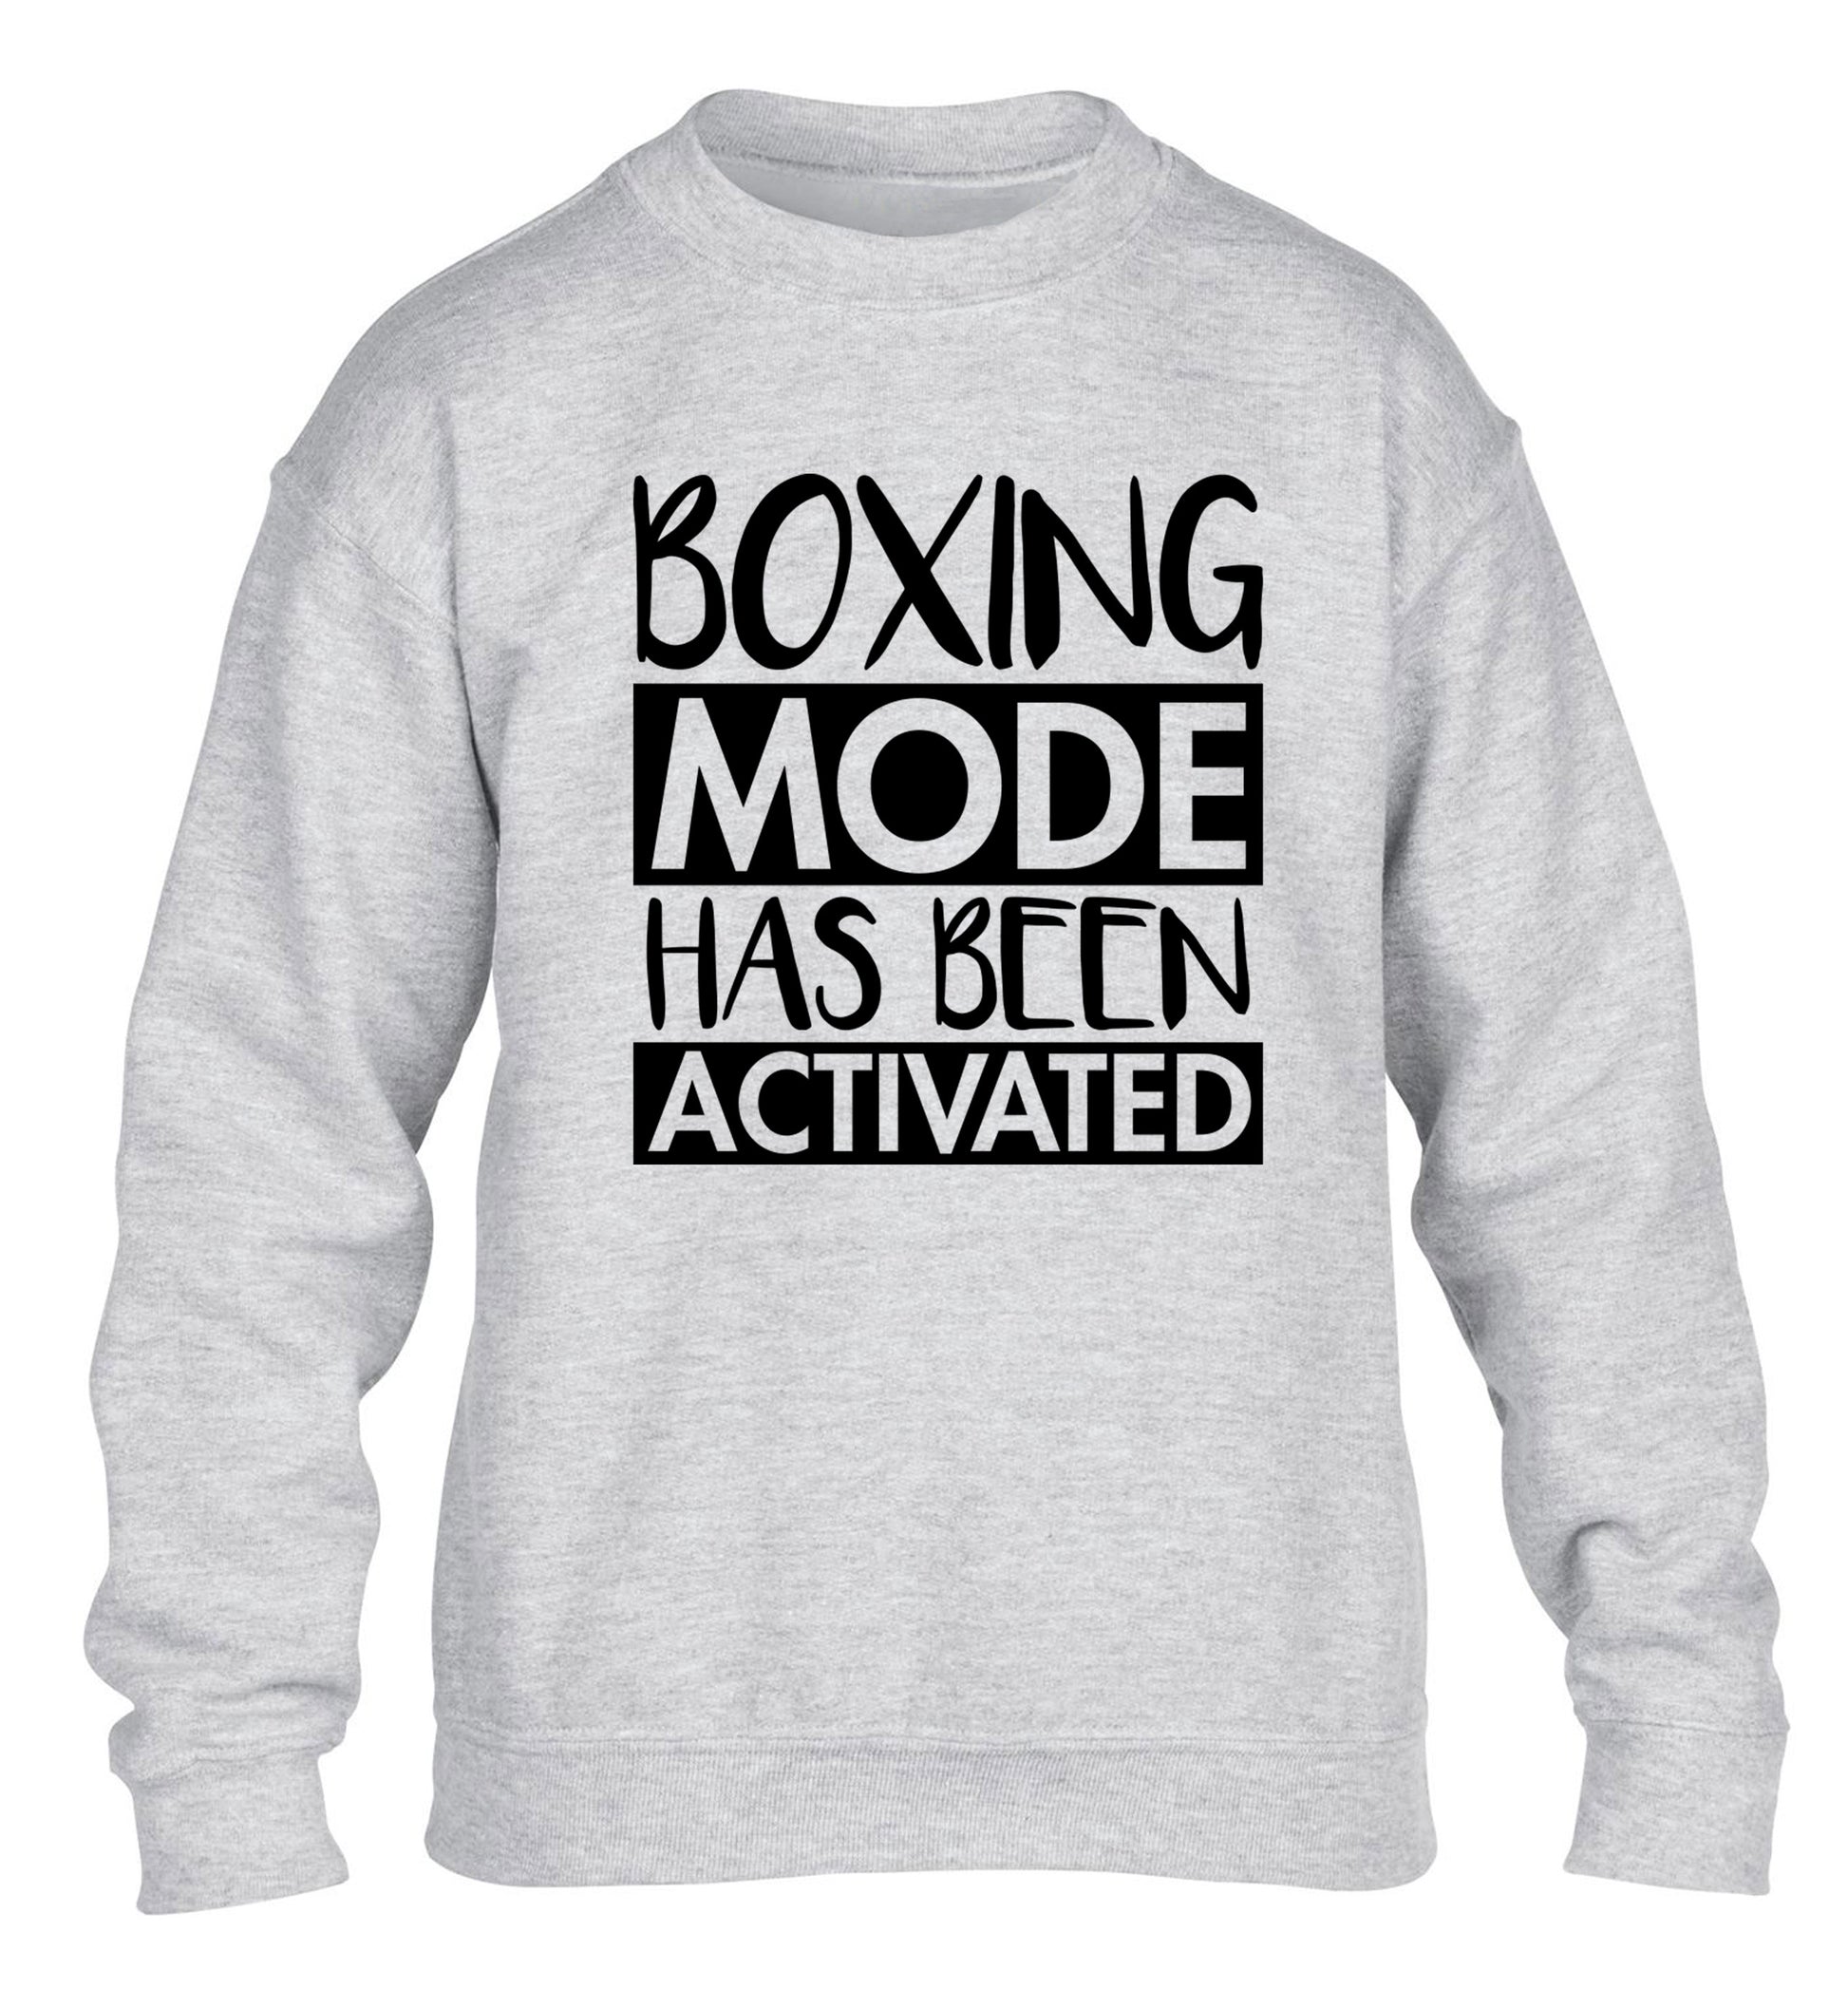 Boxing mode activated children's grey sweater 12-14 Years